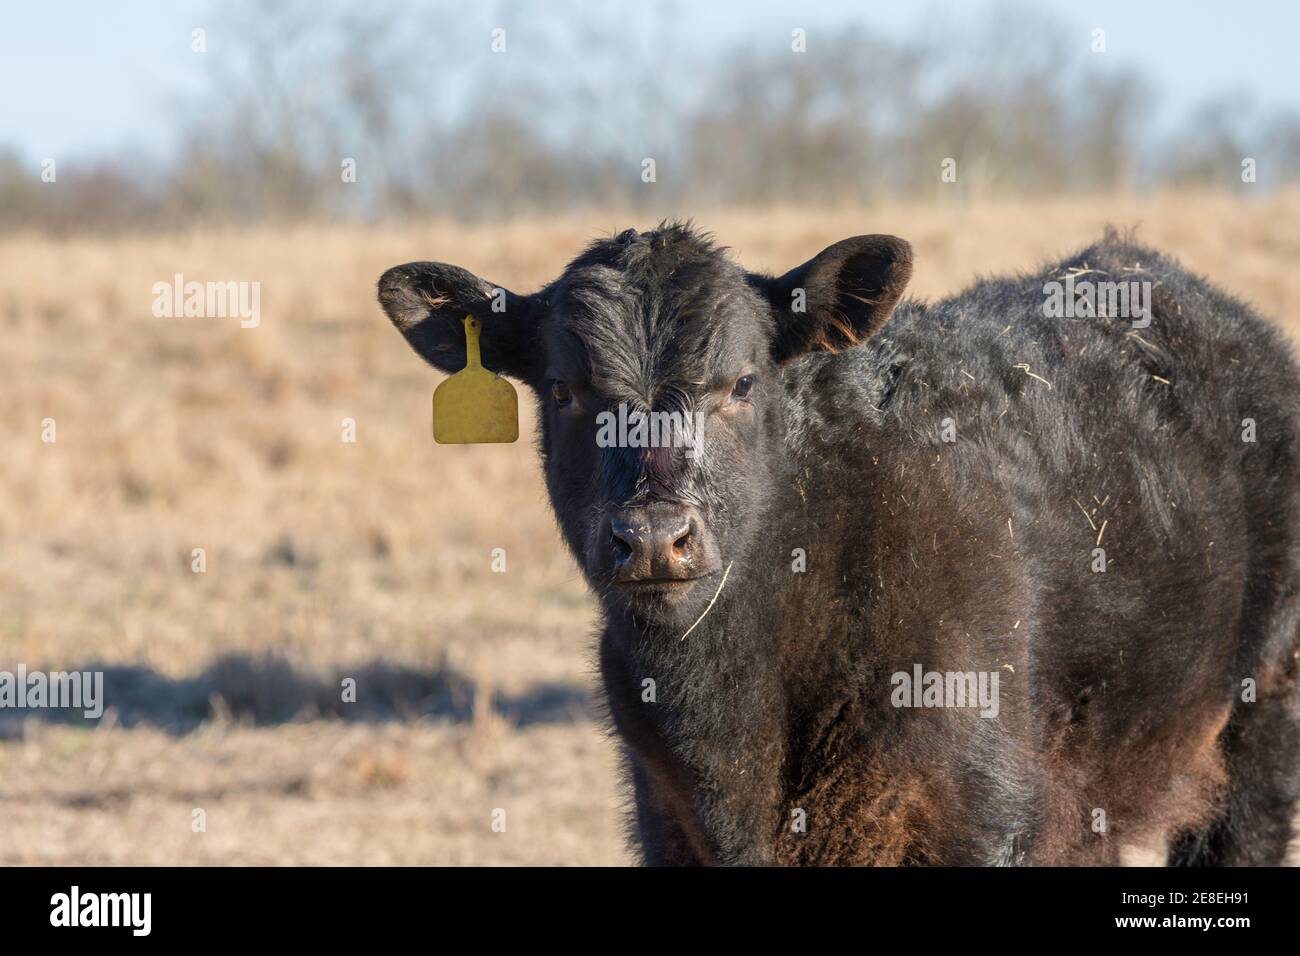 Black Angus with yellow ear tag in dormant bermuda grass field in February Stock Photo